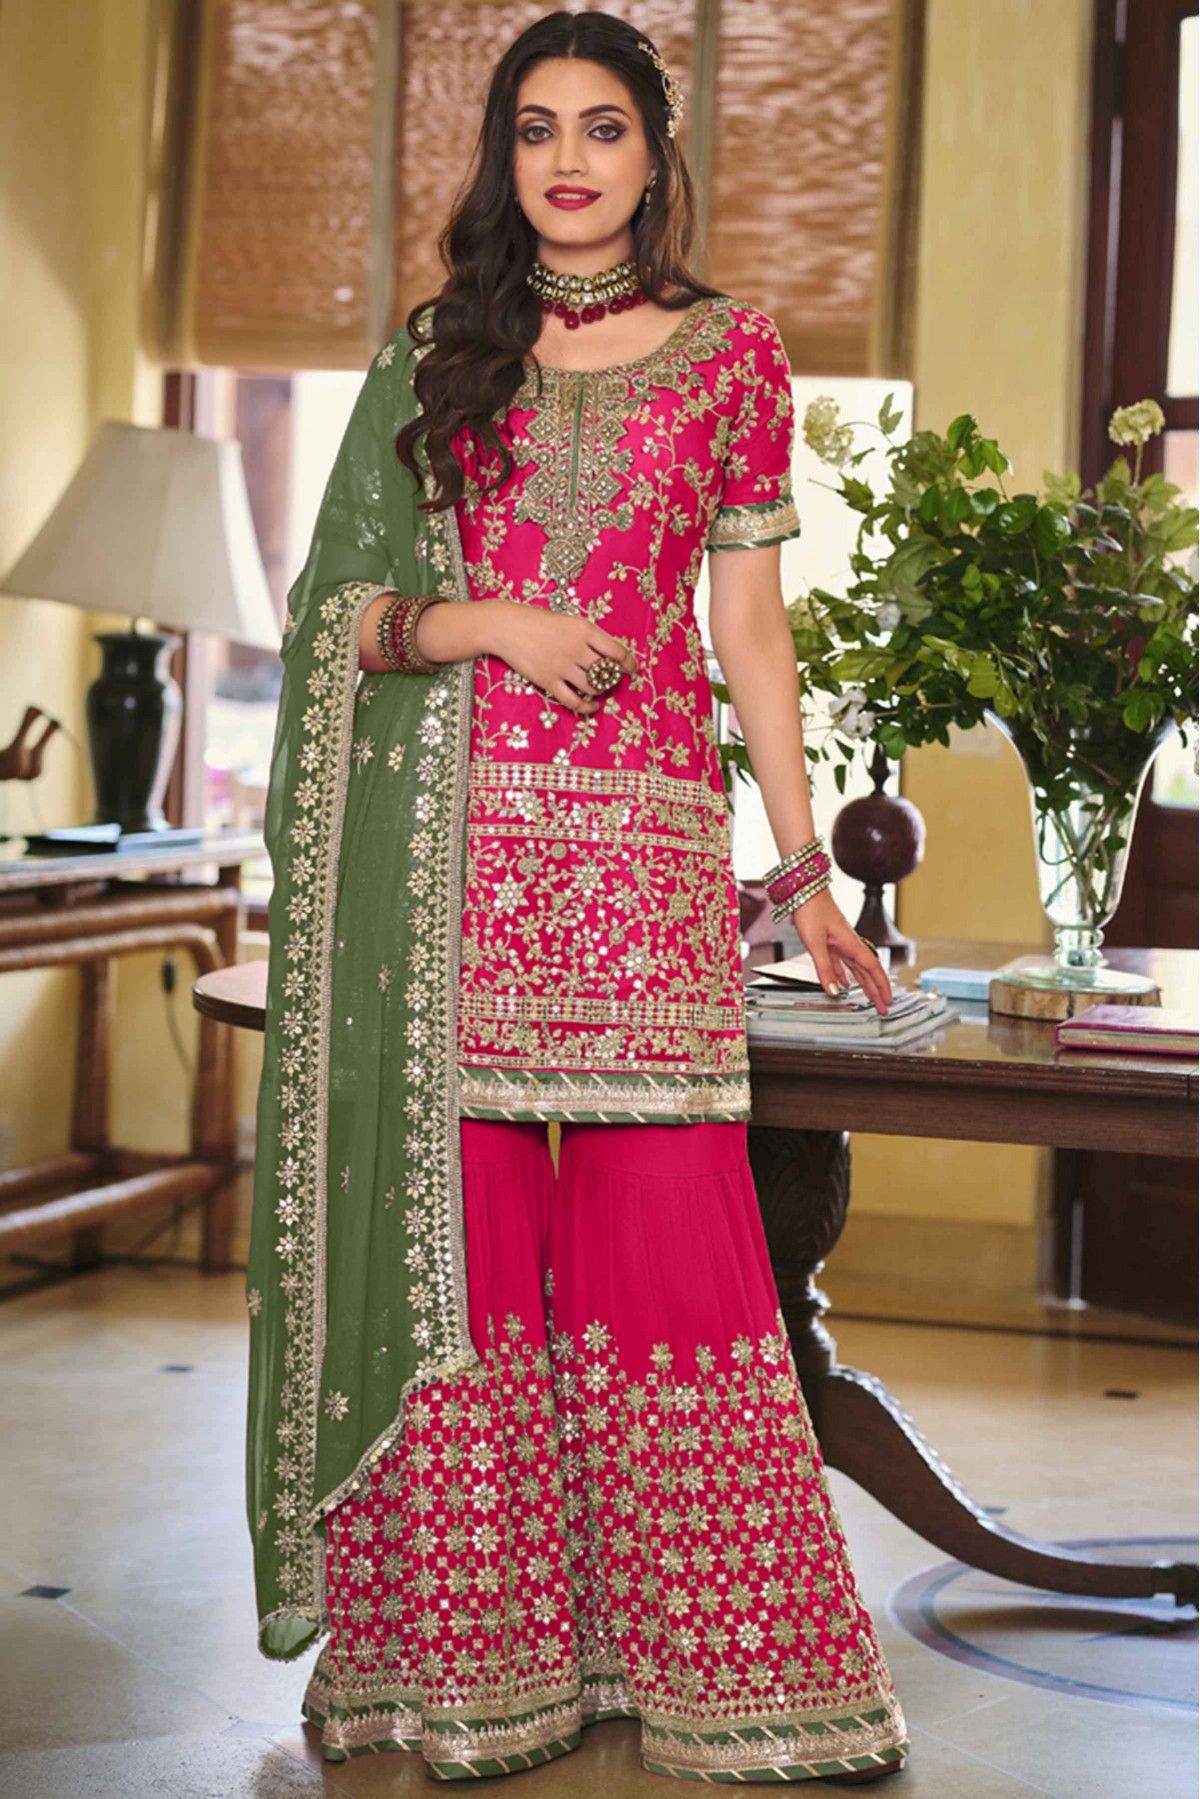 15 Stunning Designs of Pink Salwar Suits For Attractive Look